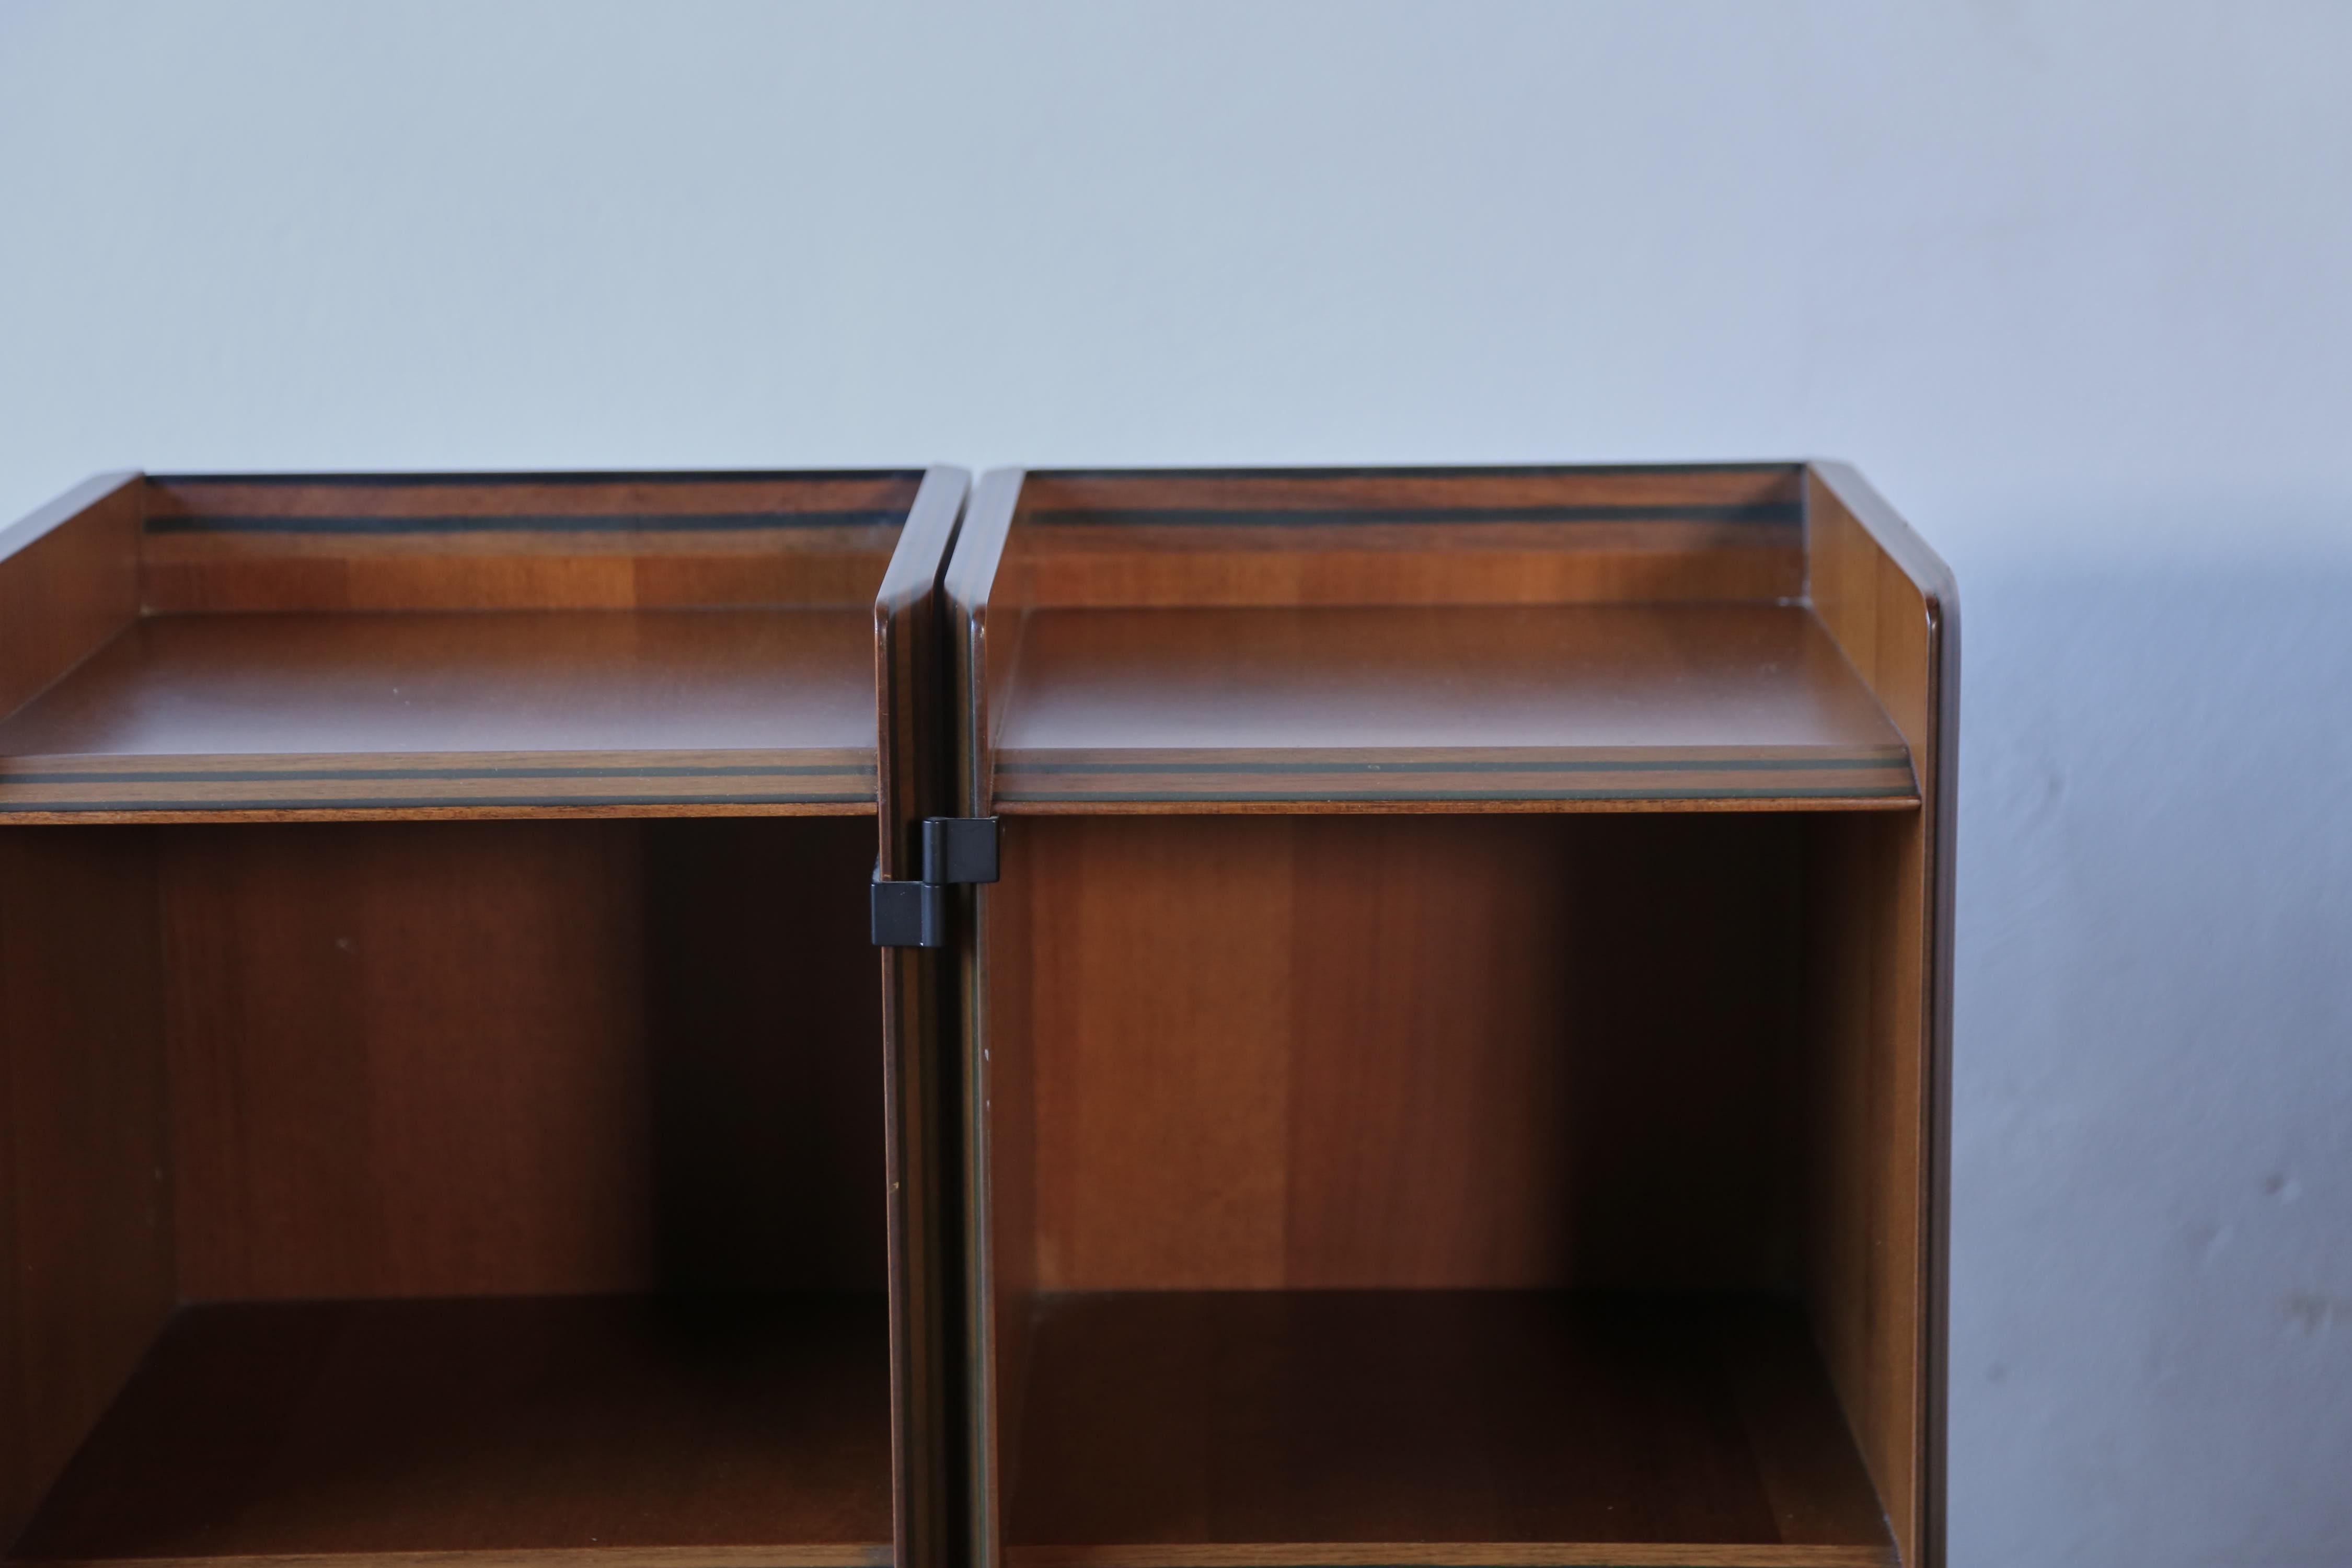 20th Century Pair of Artona Nightstands / Side Tables by Afra and Tobia Scarpa, Italy, 1970s For Sale